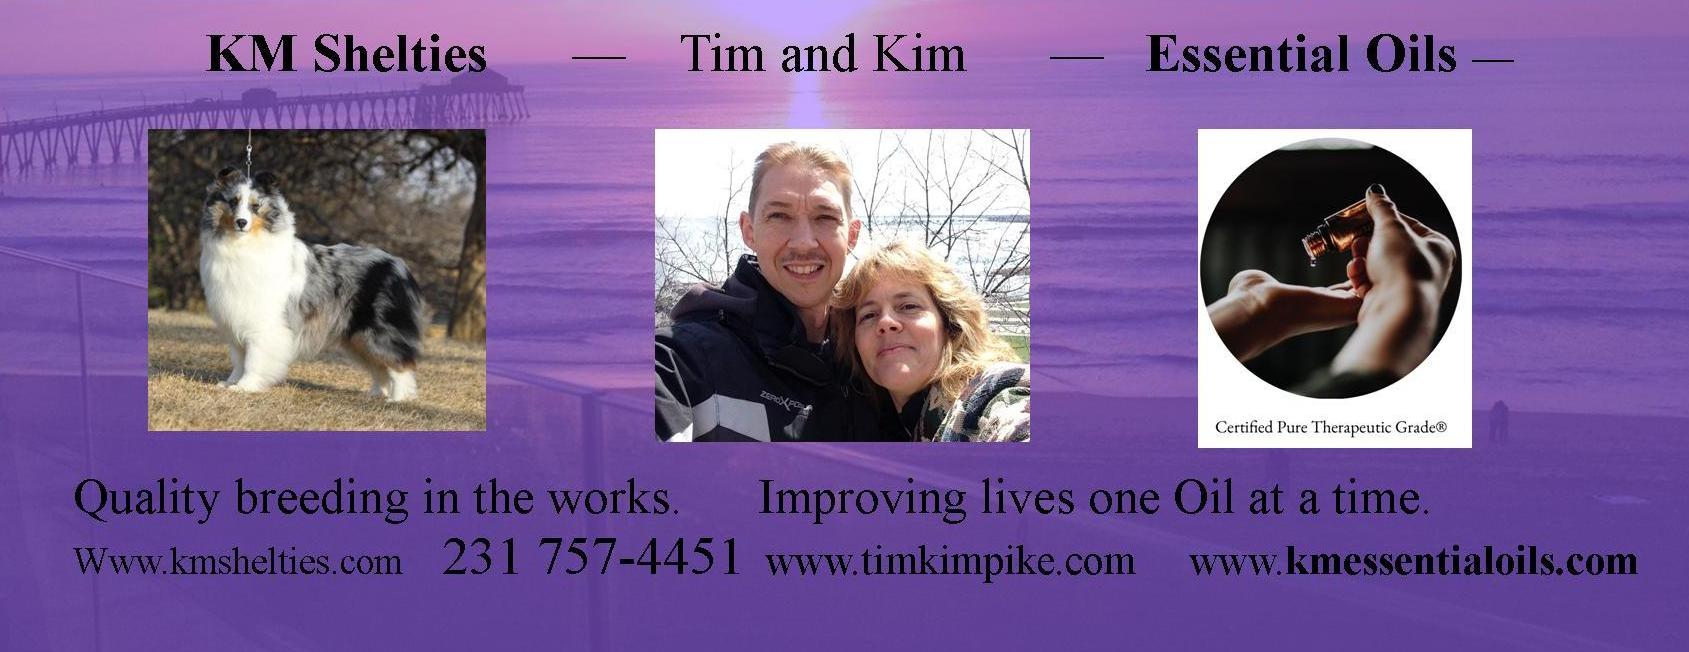 Tim and Kim KM Essential Oils find natural health solutions today.